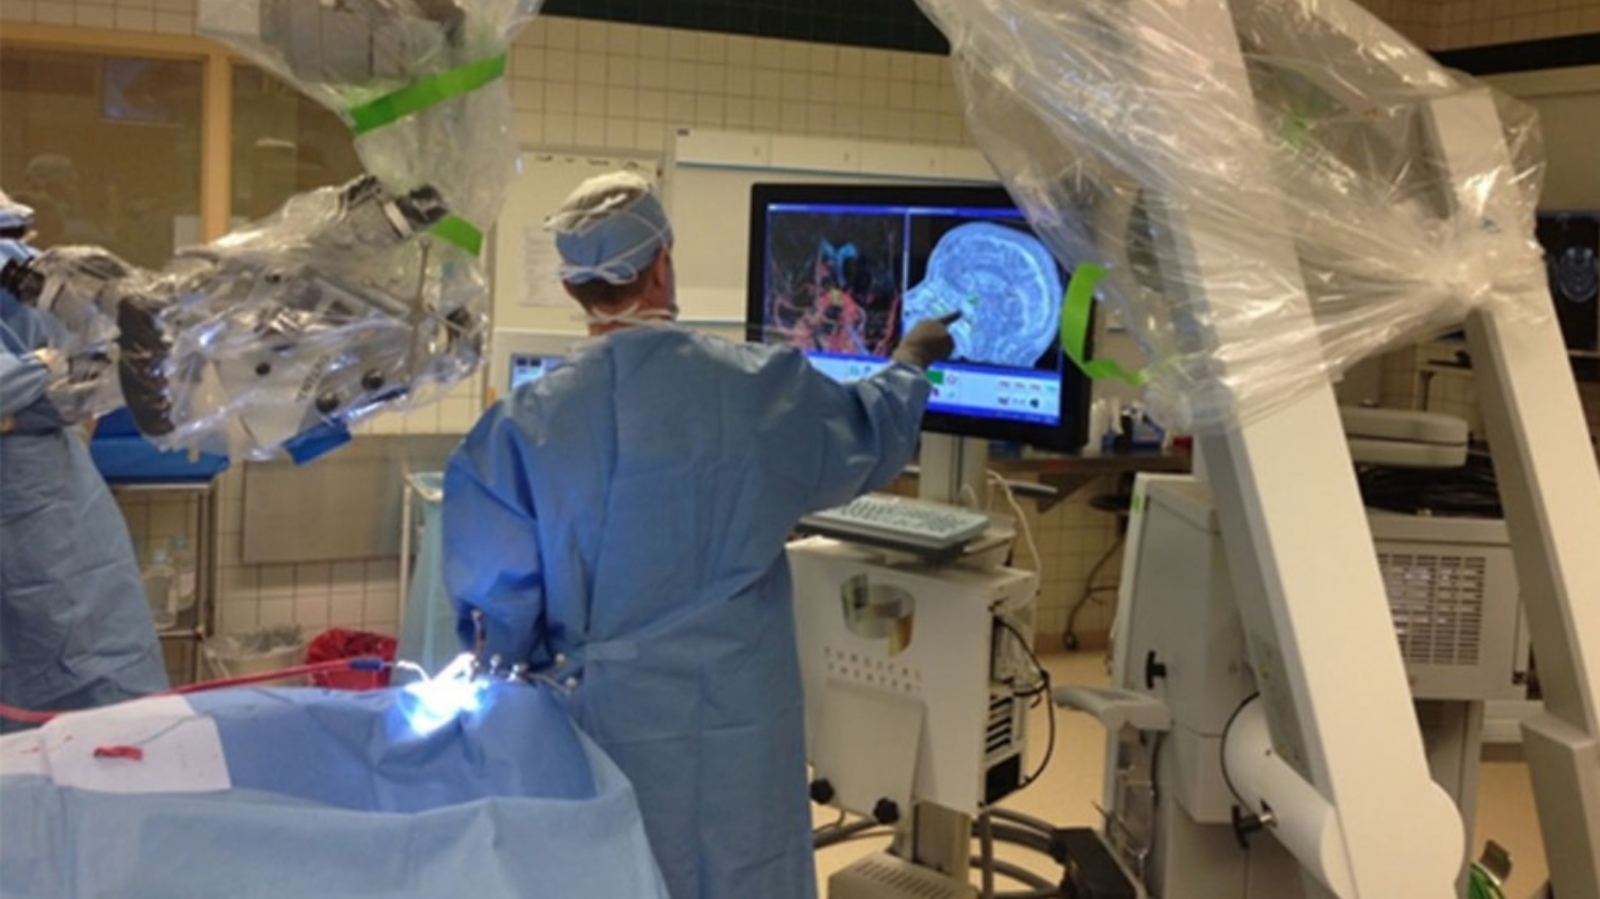 Surgical Theater VR technology helps surgeons plan operations and guides them during the procedure. Photo: courtesy